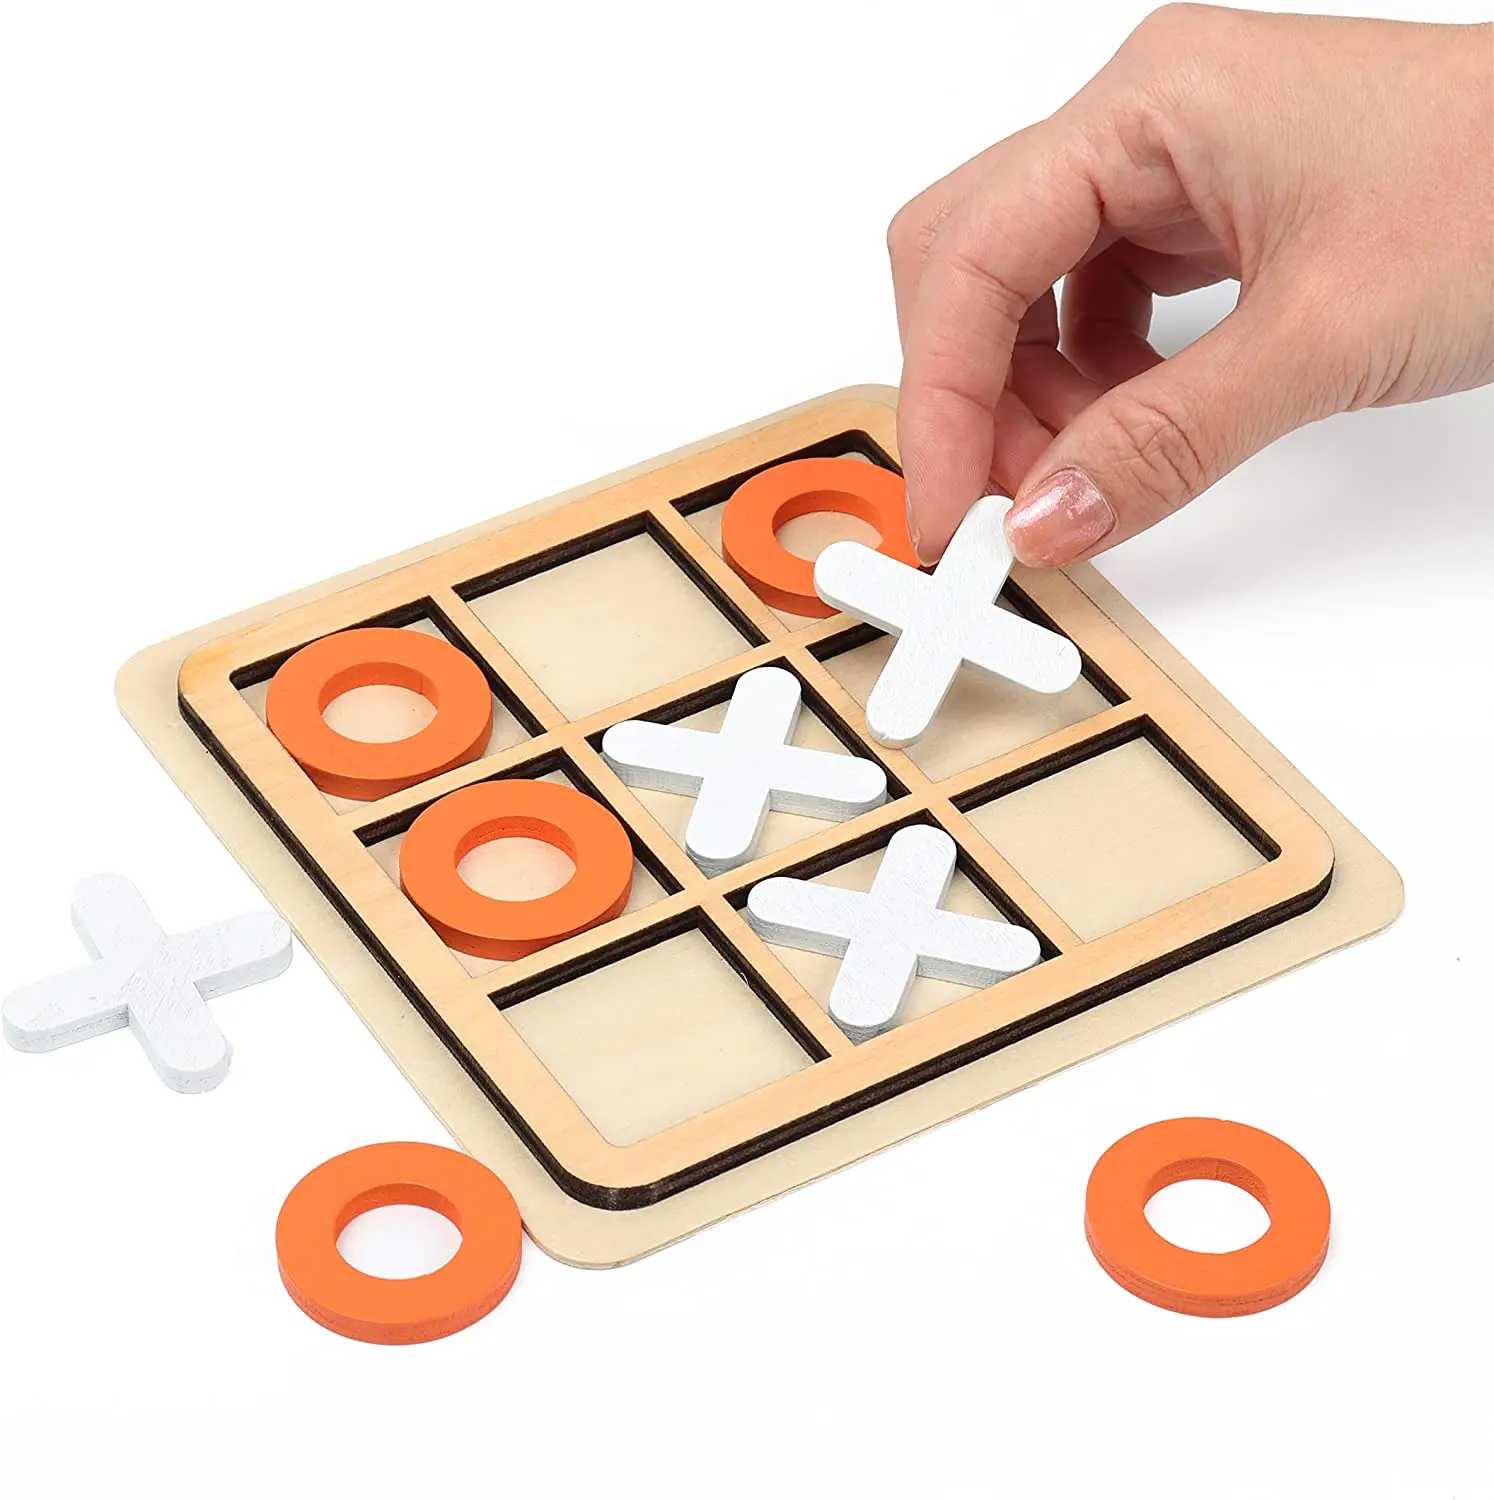 Tic Tac Toe Game 4.5 cm Green, Toys \ Games